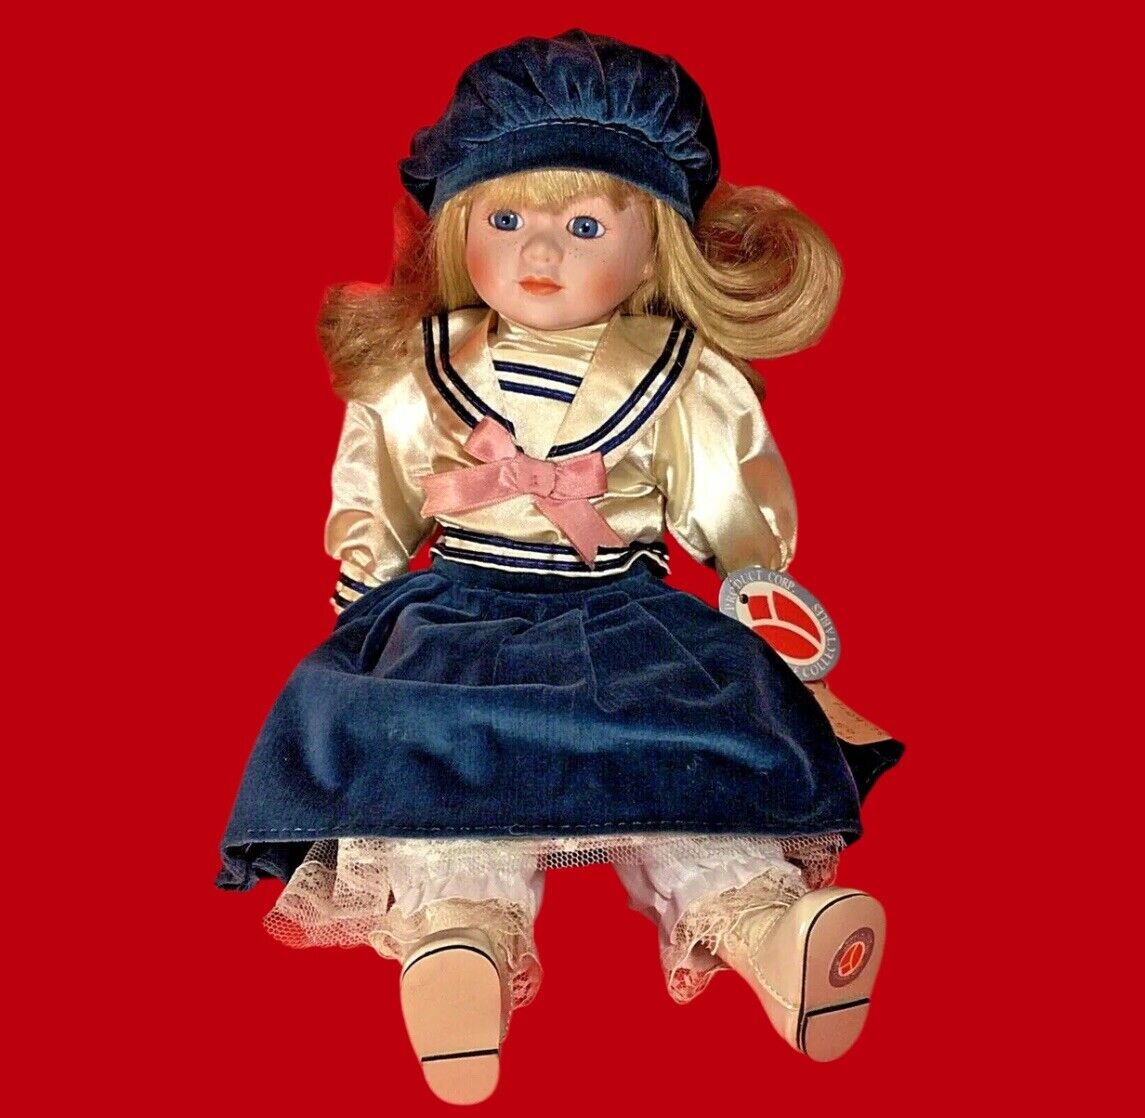 MUSICAL DOLL VINTAGE 1975 DELTON PRODUCTS CORP PLAYS ROW YOUR BOAT SAILER GIRL